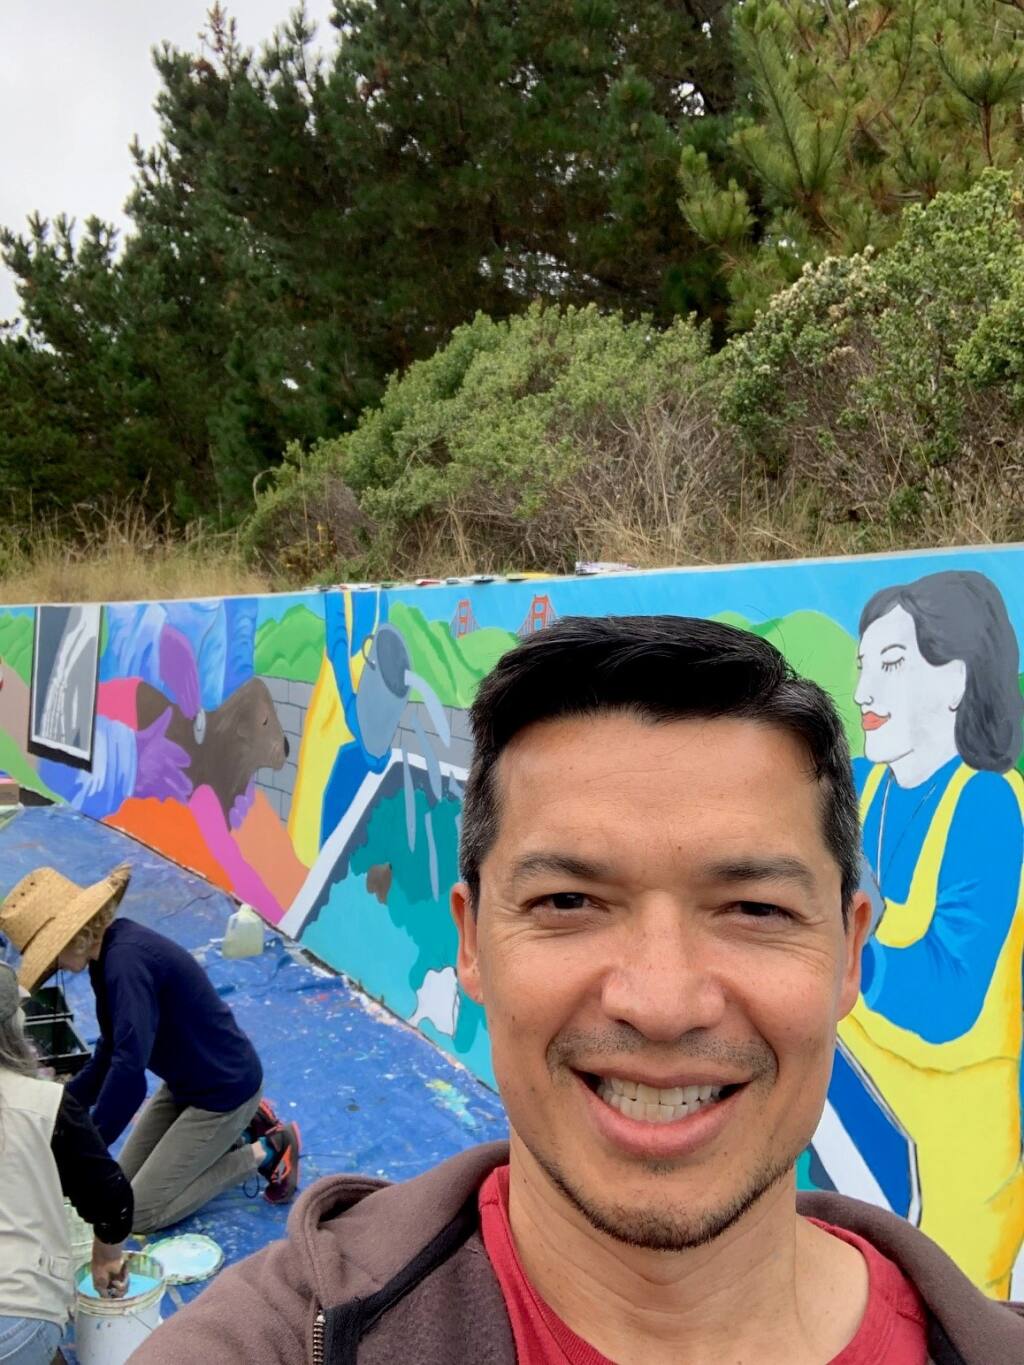 Steve Branton, financial adviser and principal at Private Ocean, stands in front of a mural he helped paint with other volunteers from the firm at the Marine Mammal Center in Sausalito in September 2019. (Private Ocean Photo)